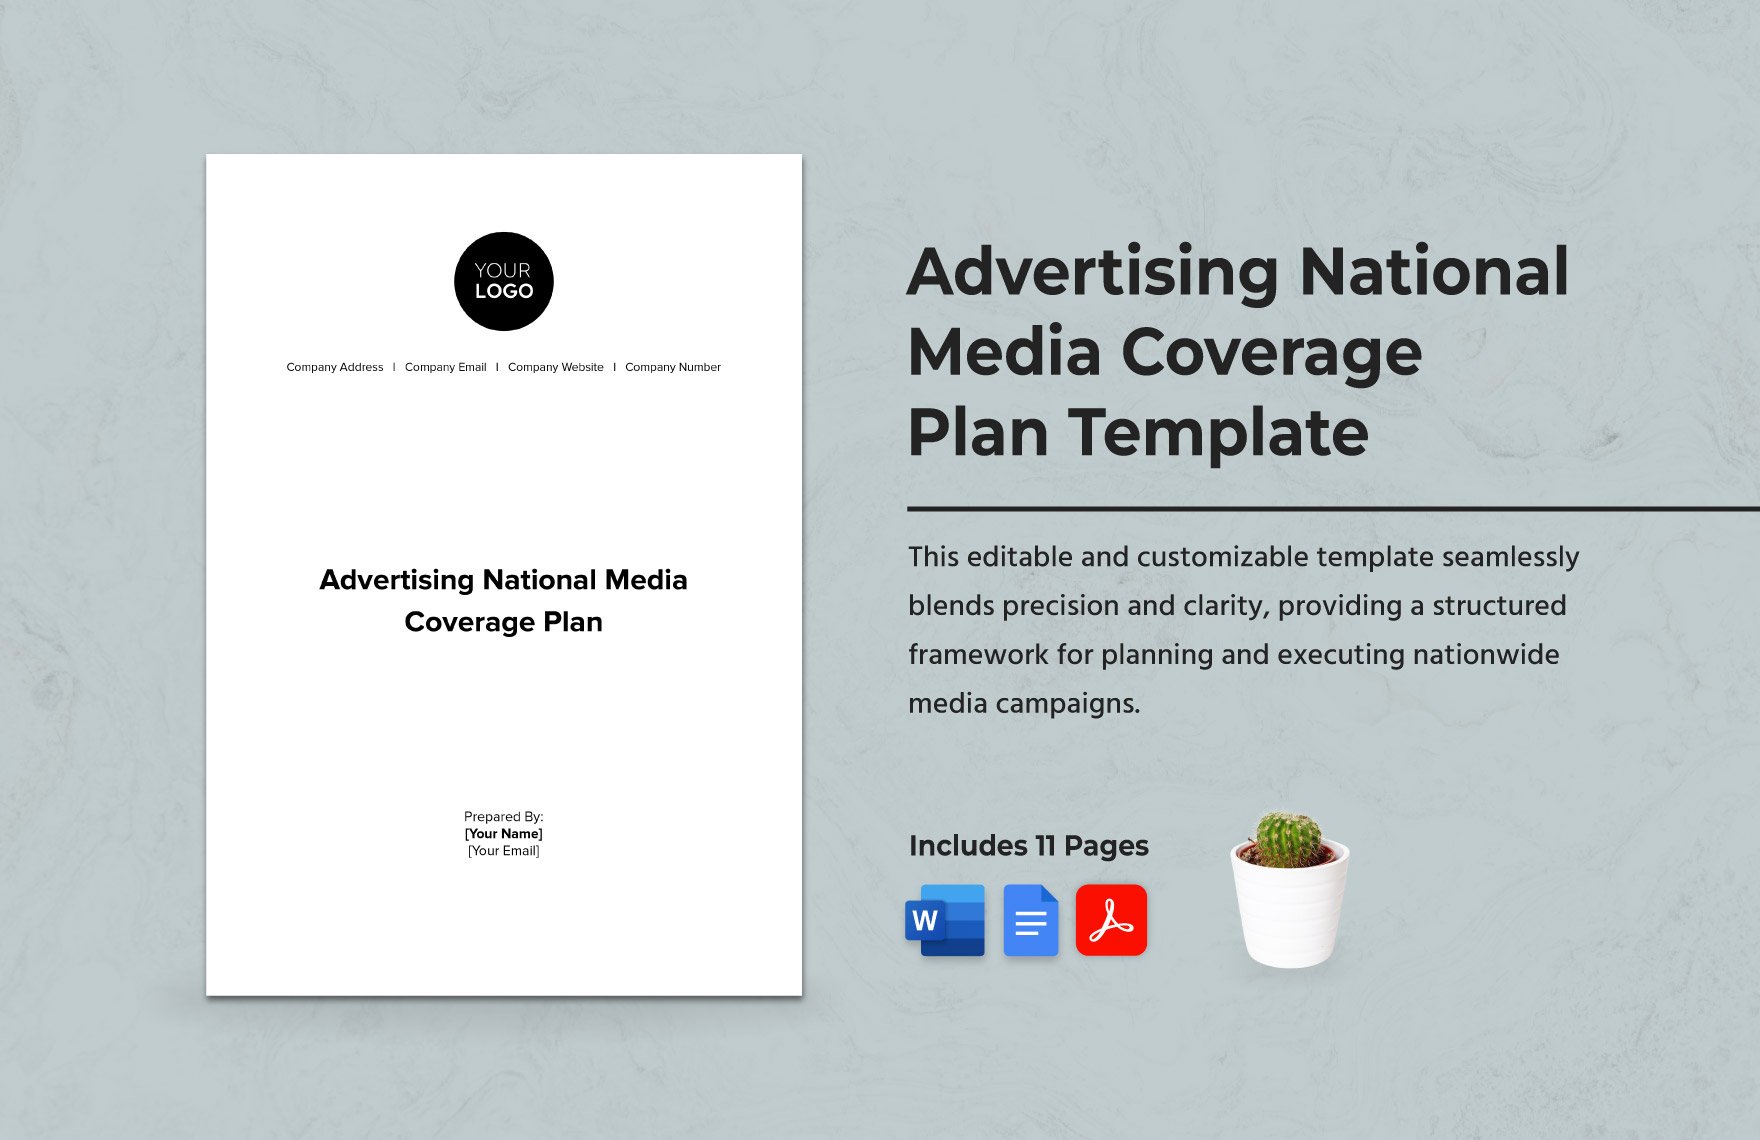 Advertising National Media Coverage Plan Template in Word, Google Docs, PDF